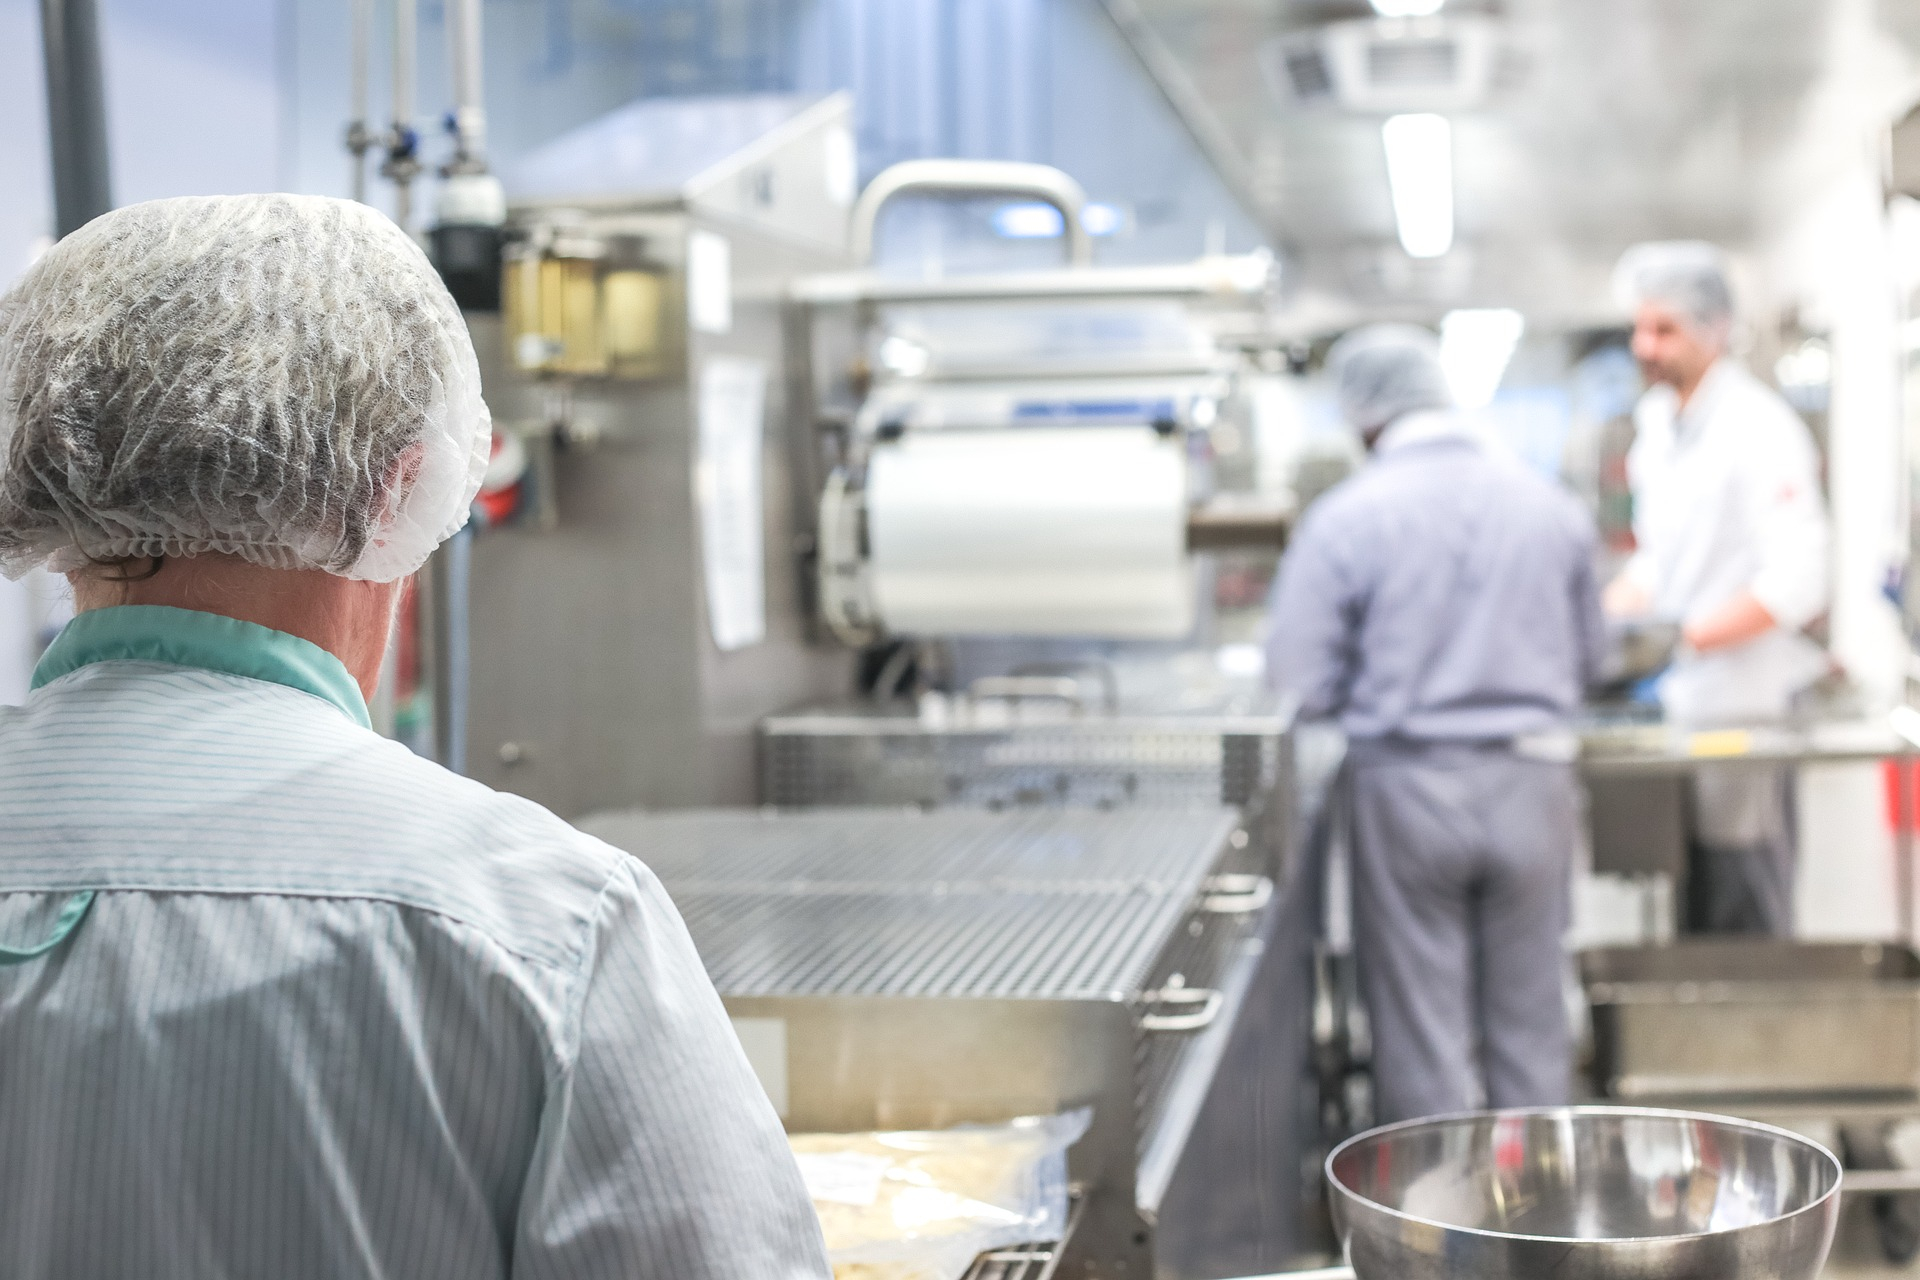 Food Safety Standards - Controlling Hazards from Farm-to-fork